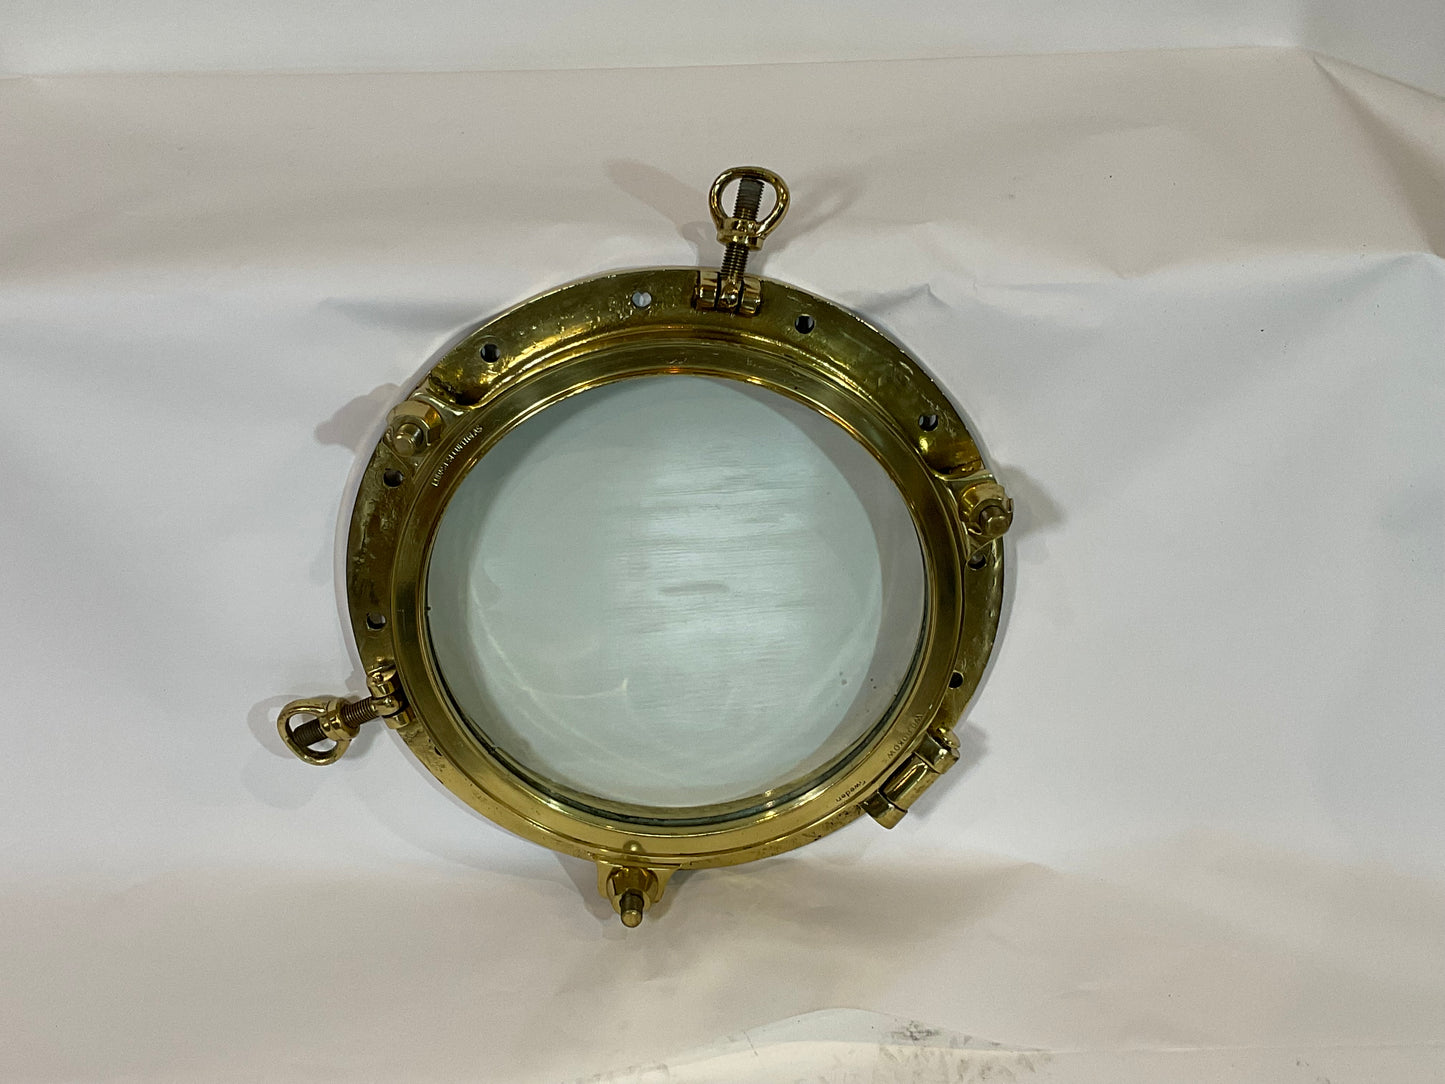 Solid Brass Ships Porthole Highly Polished with Lacquer Finish - Lannan Gallery